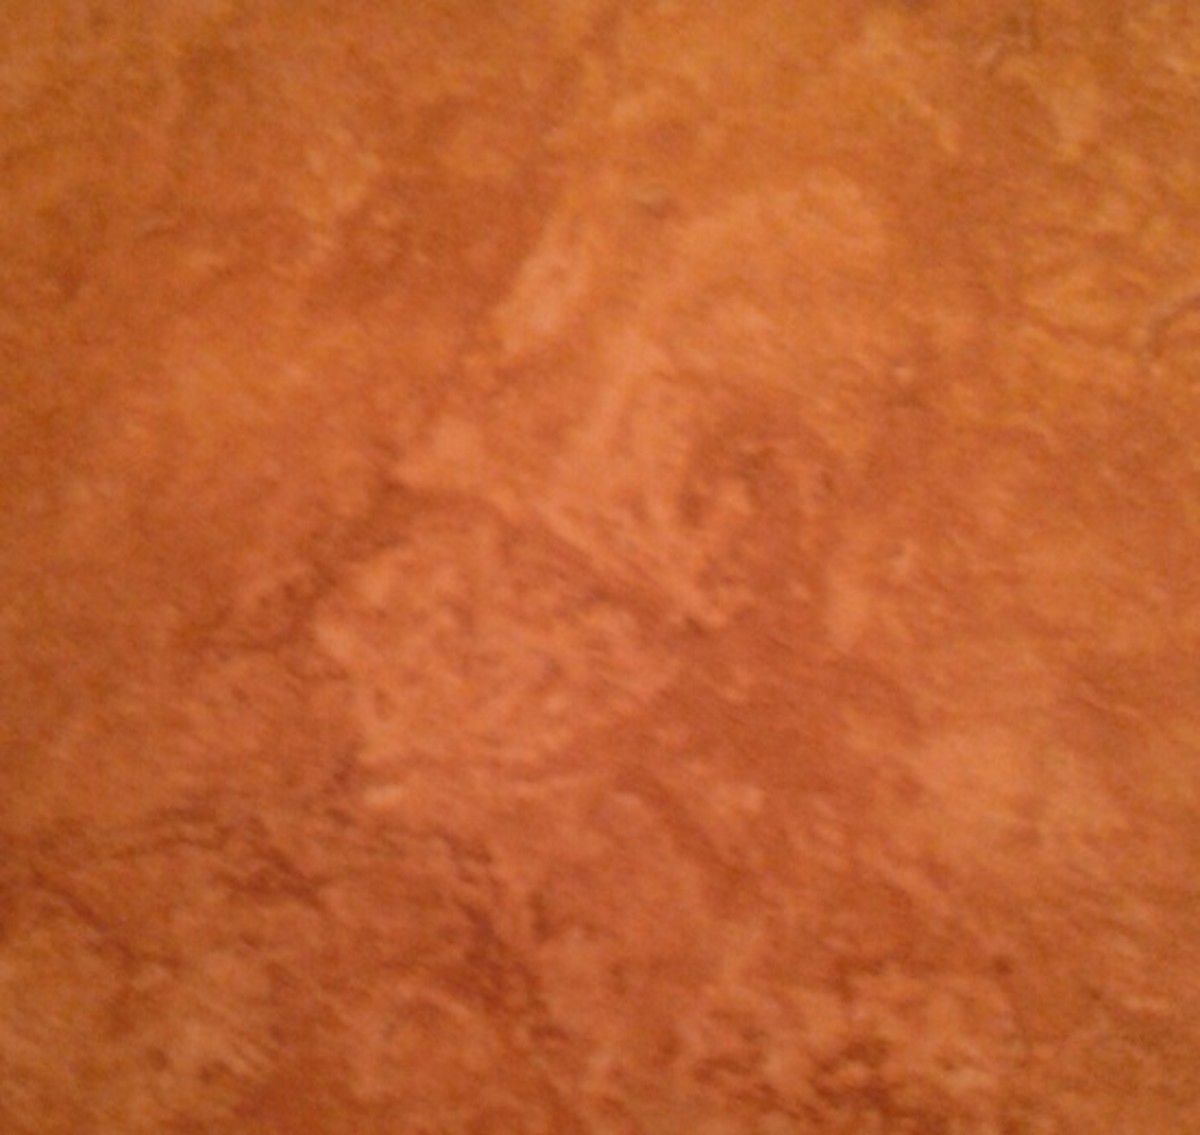 The creepy face of the Turtle Man looks up at me from my tile floor.  What do you see?